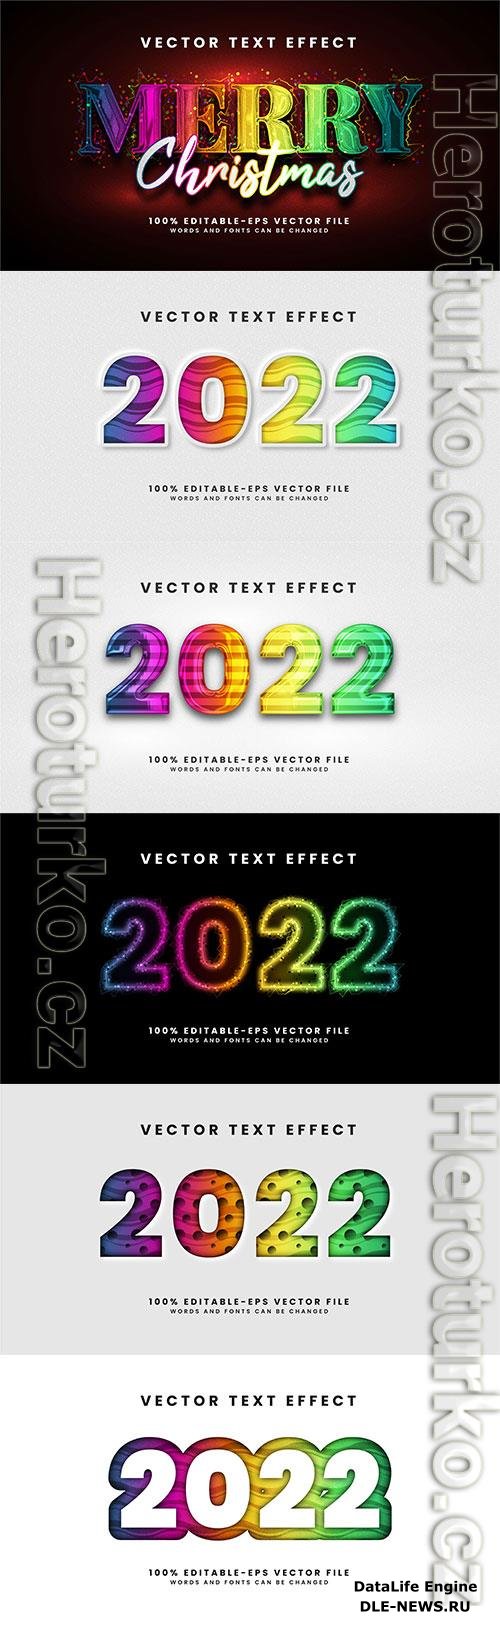 2022 glow text effect, editable text style effect with colorful theme, premium vector